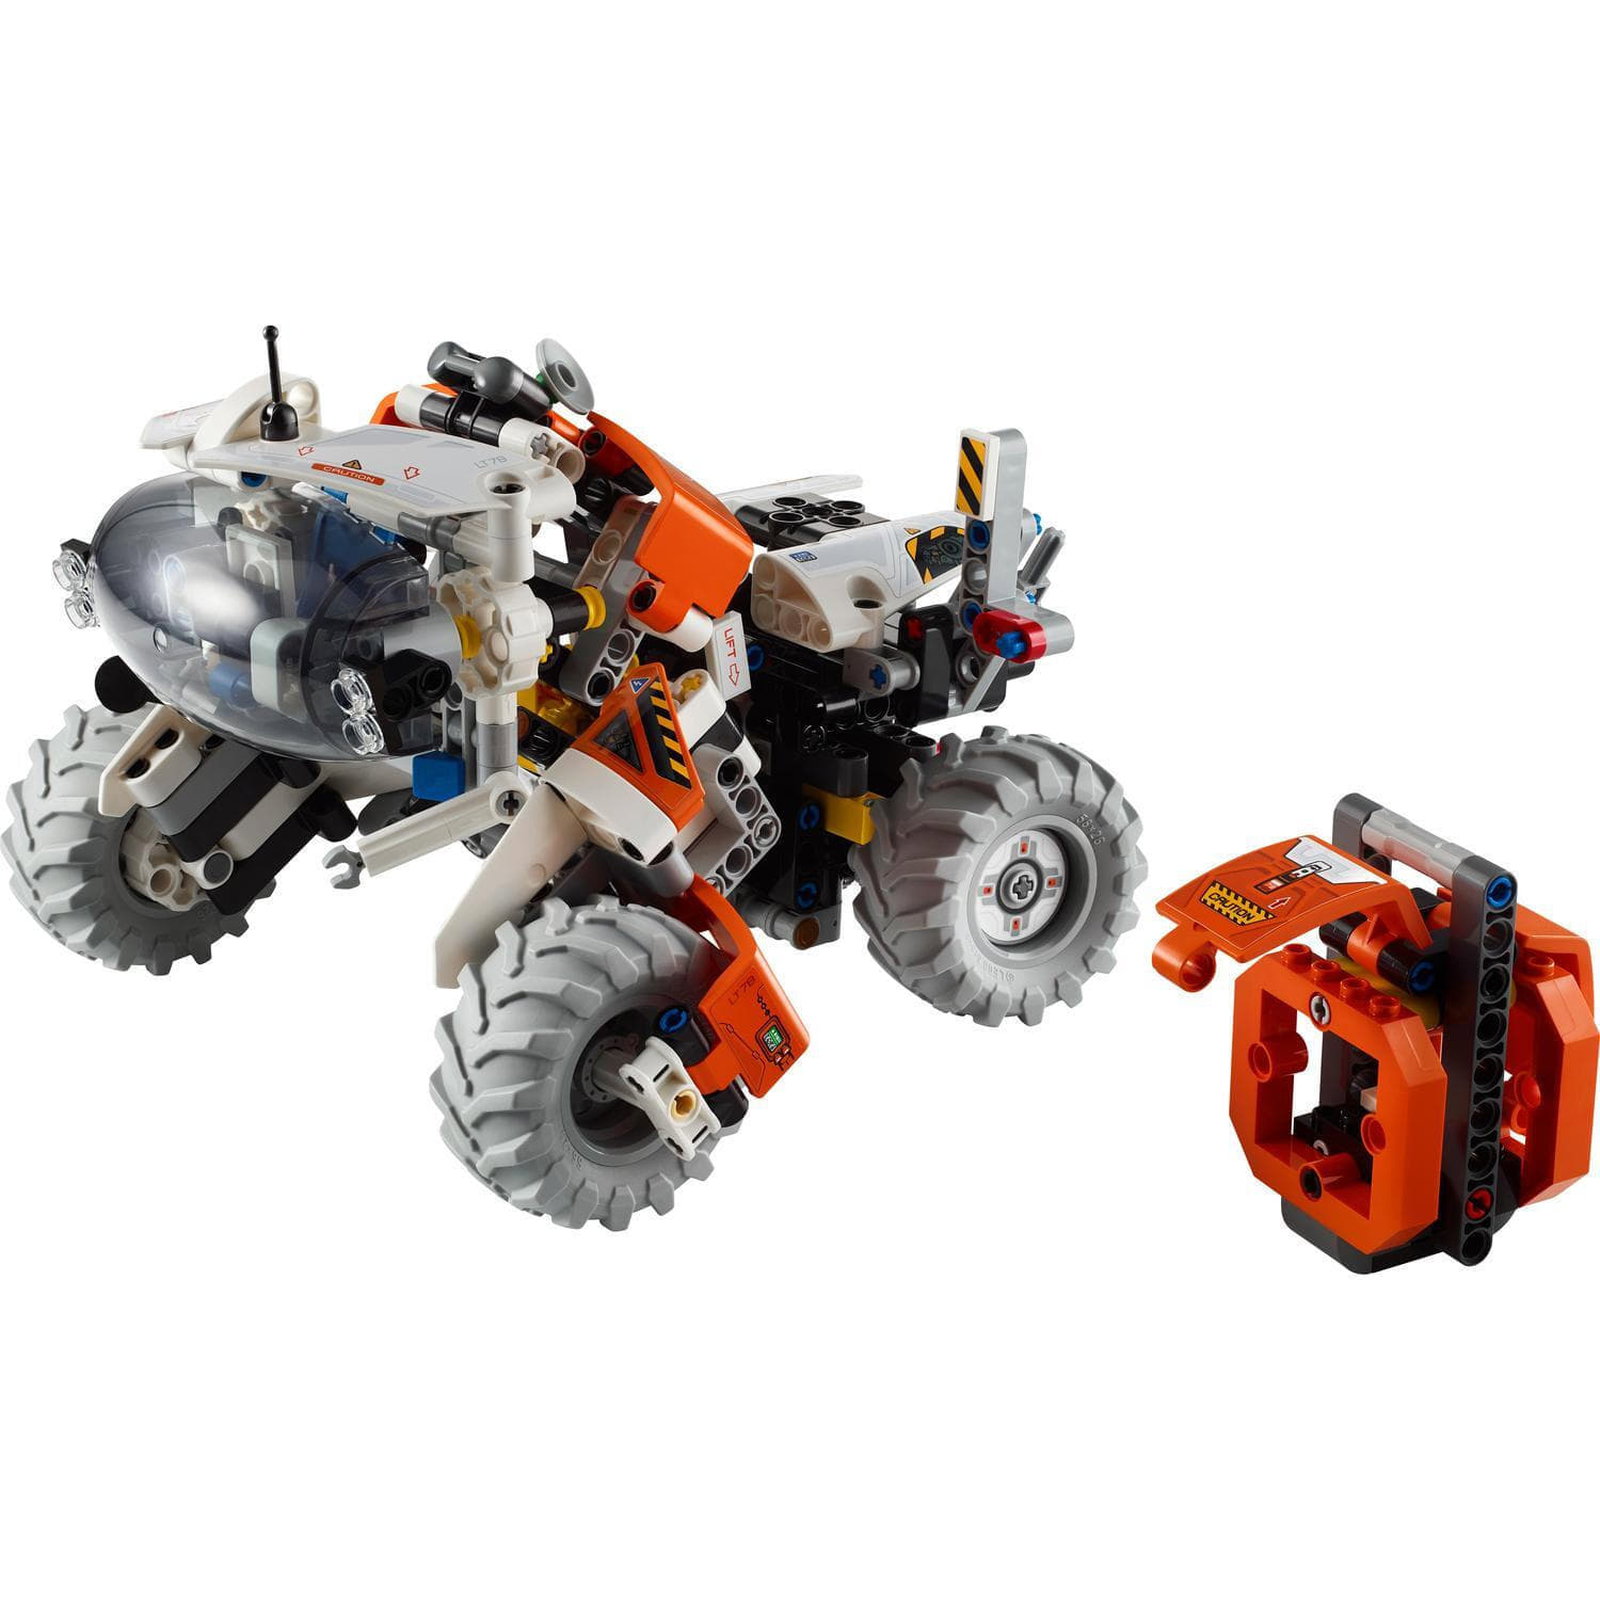 Technic 42178 Surface Space Loader LT78